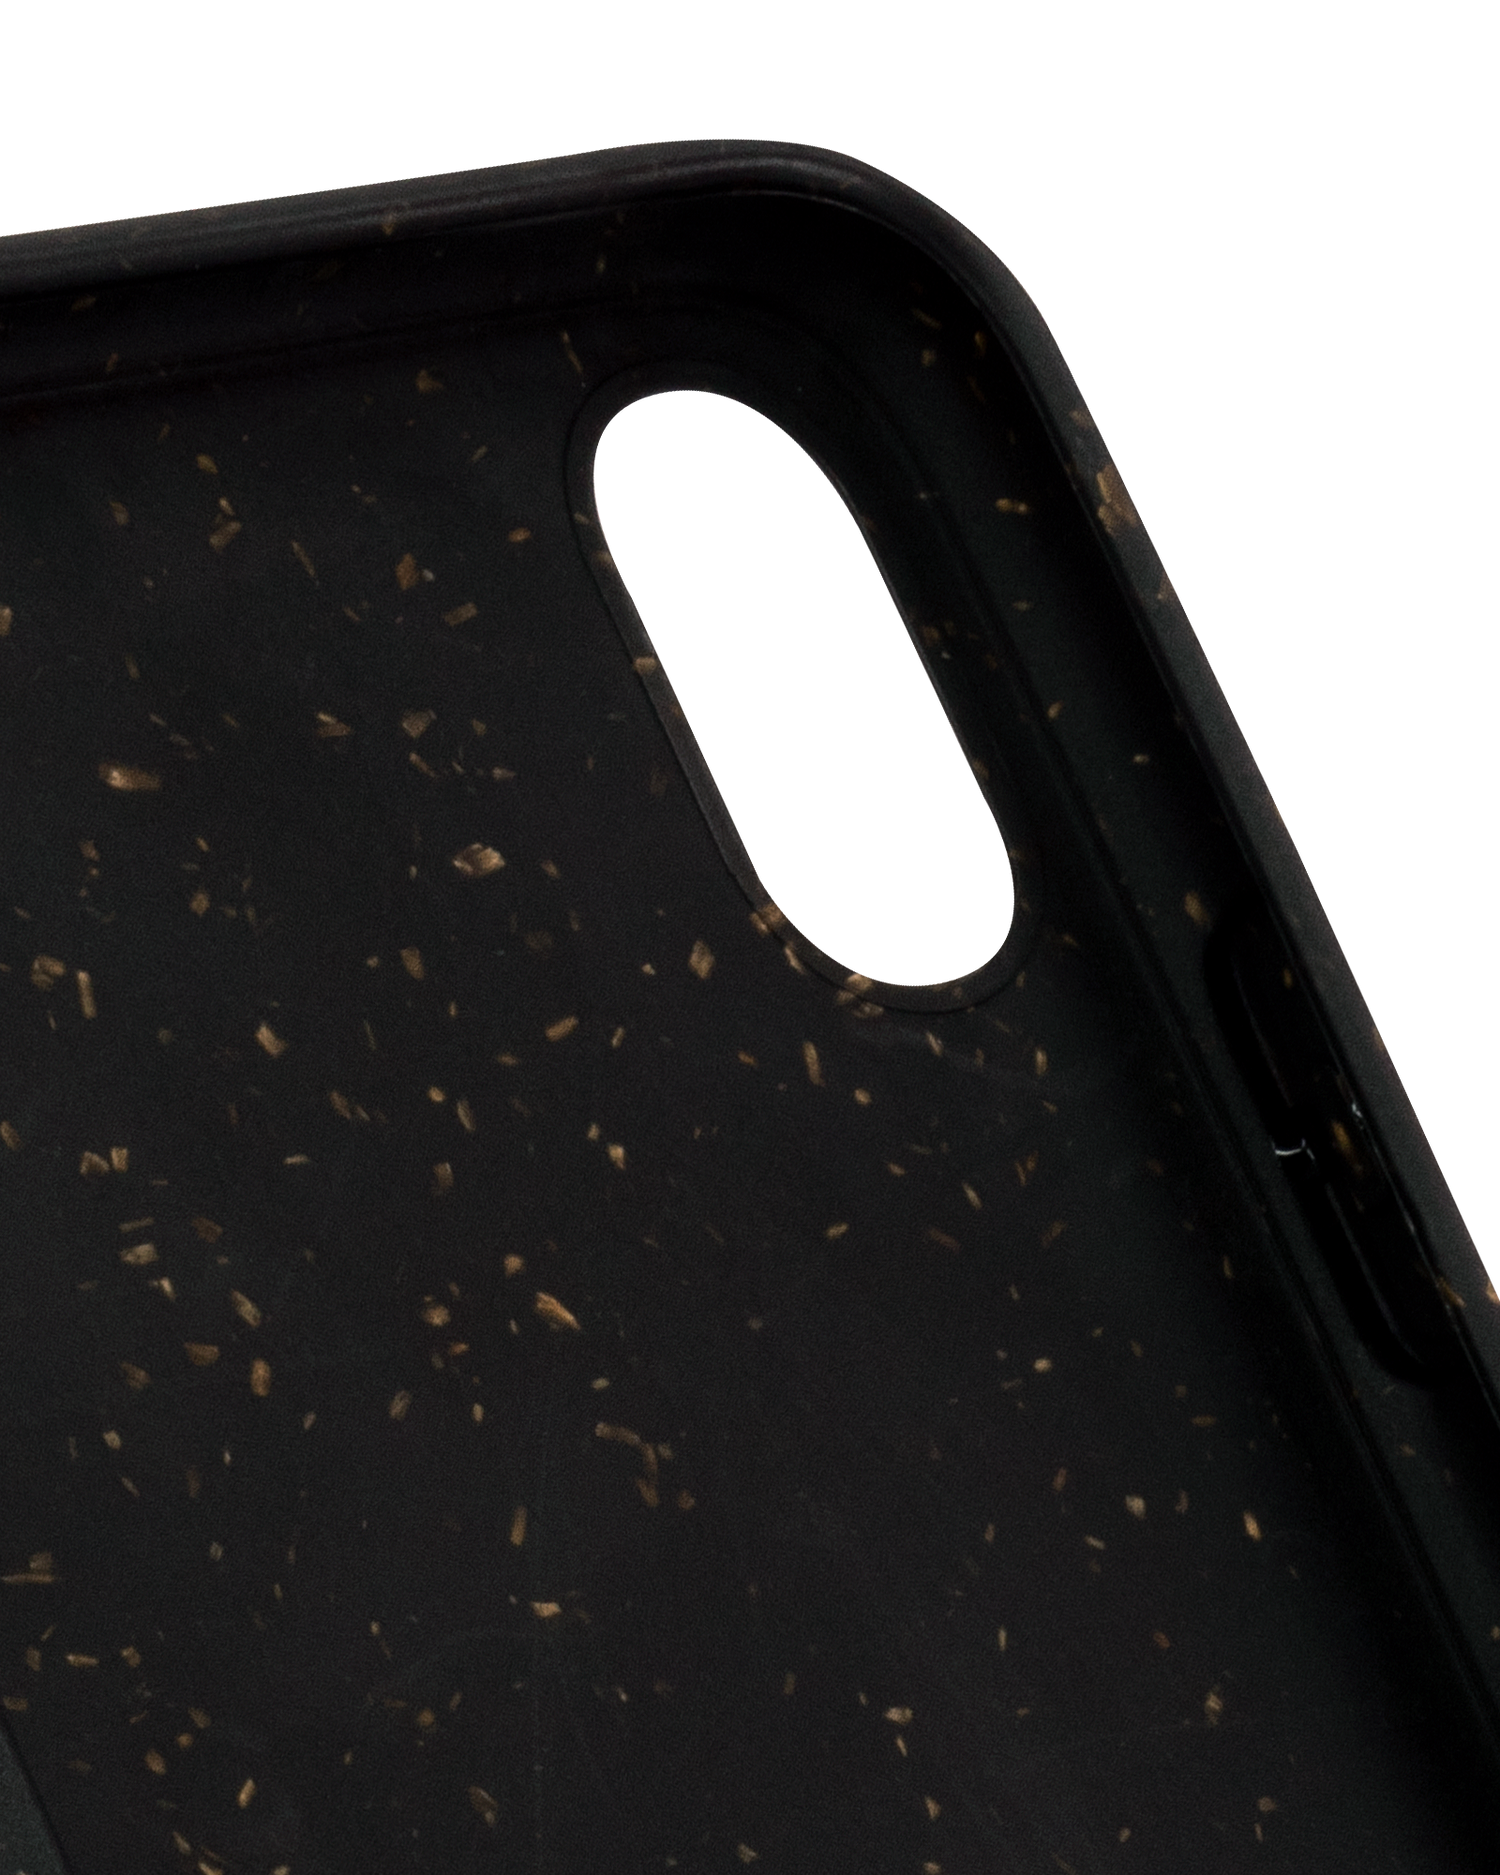 Black Eco-Friendly Phone Case for Apple iPhone X, Apple iPhone XS: Details outside